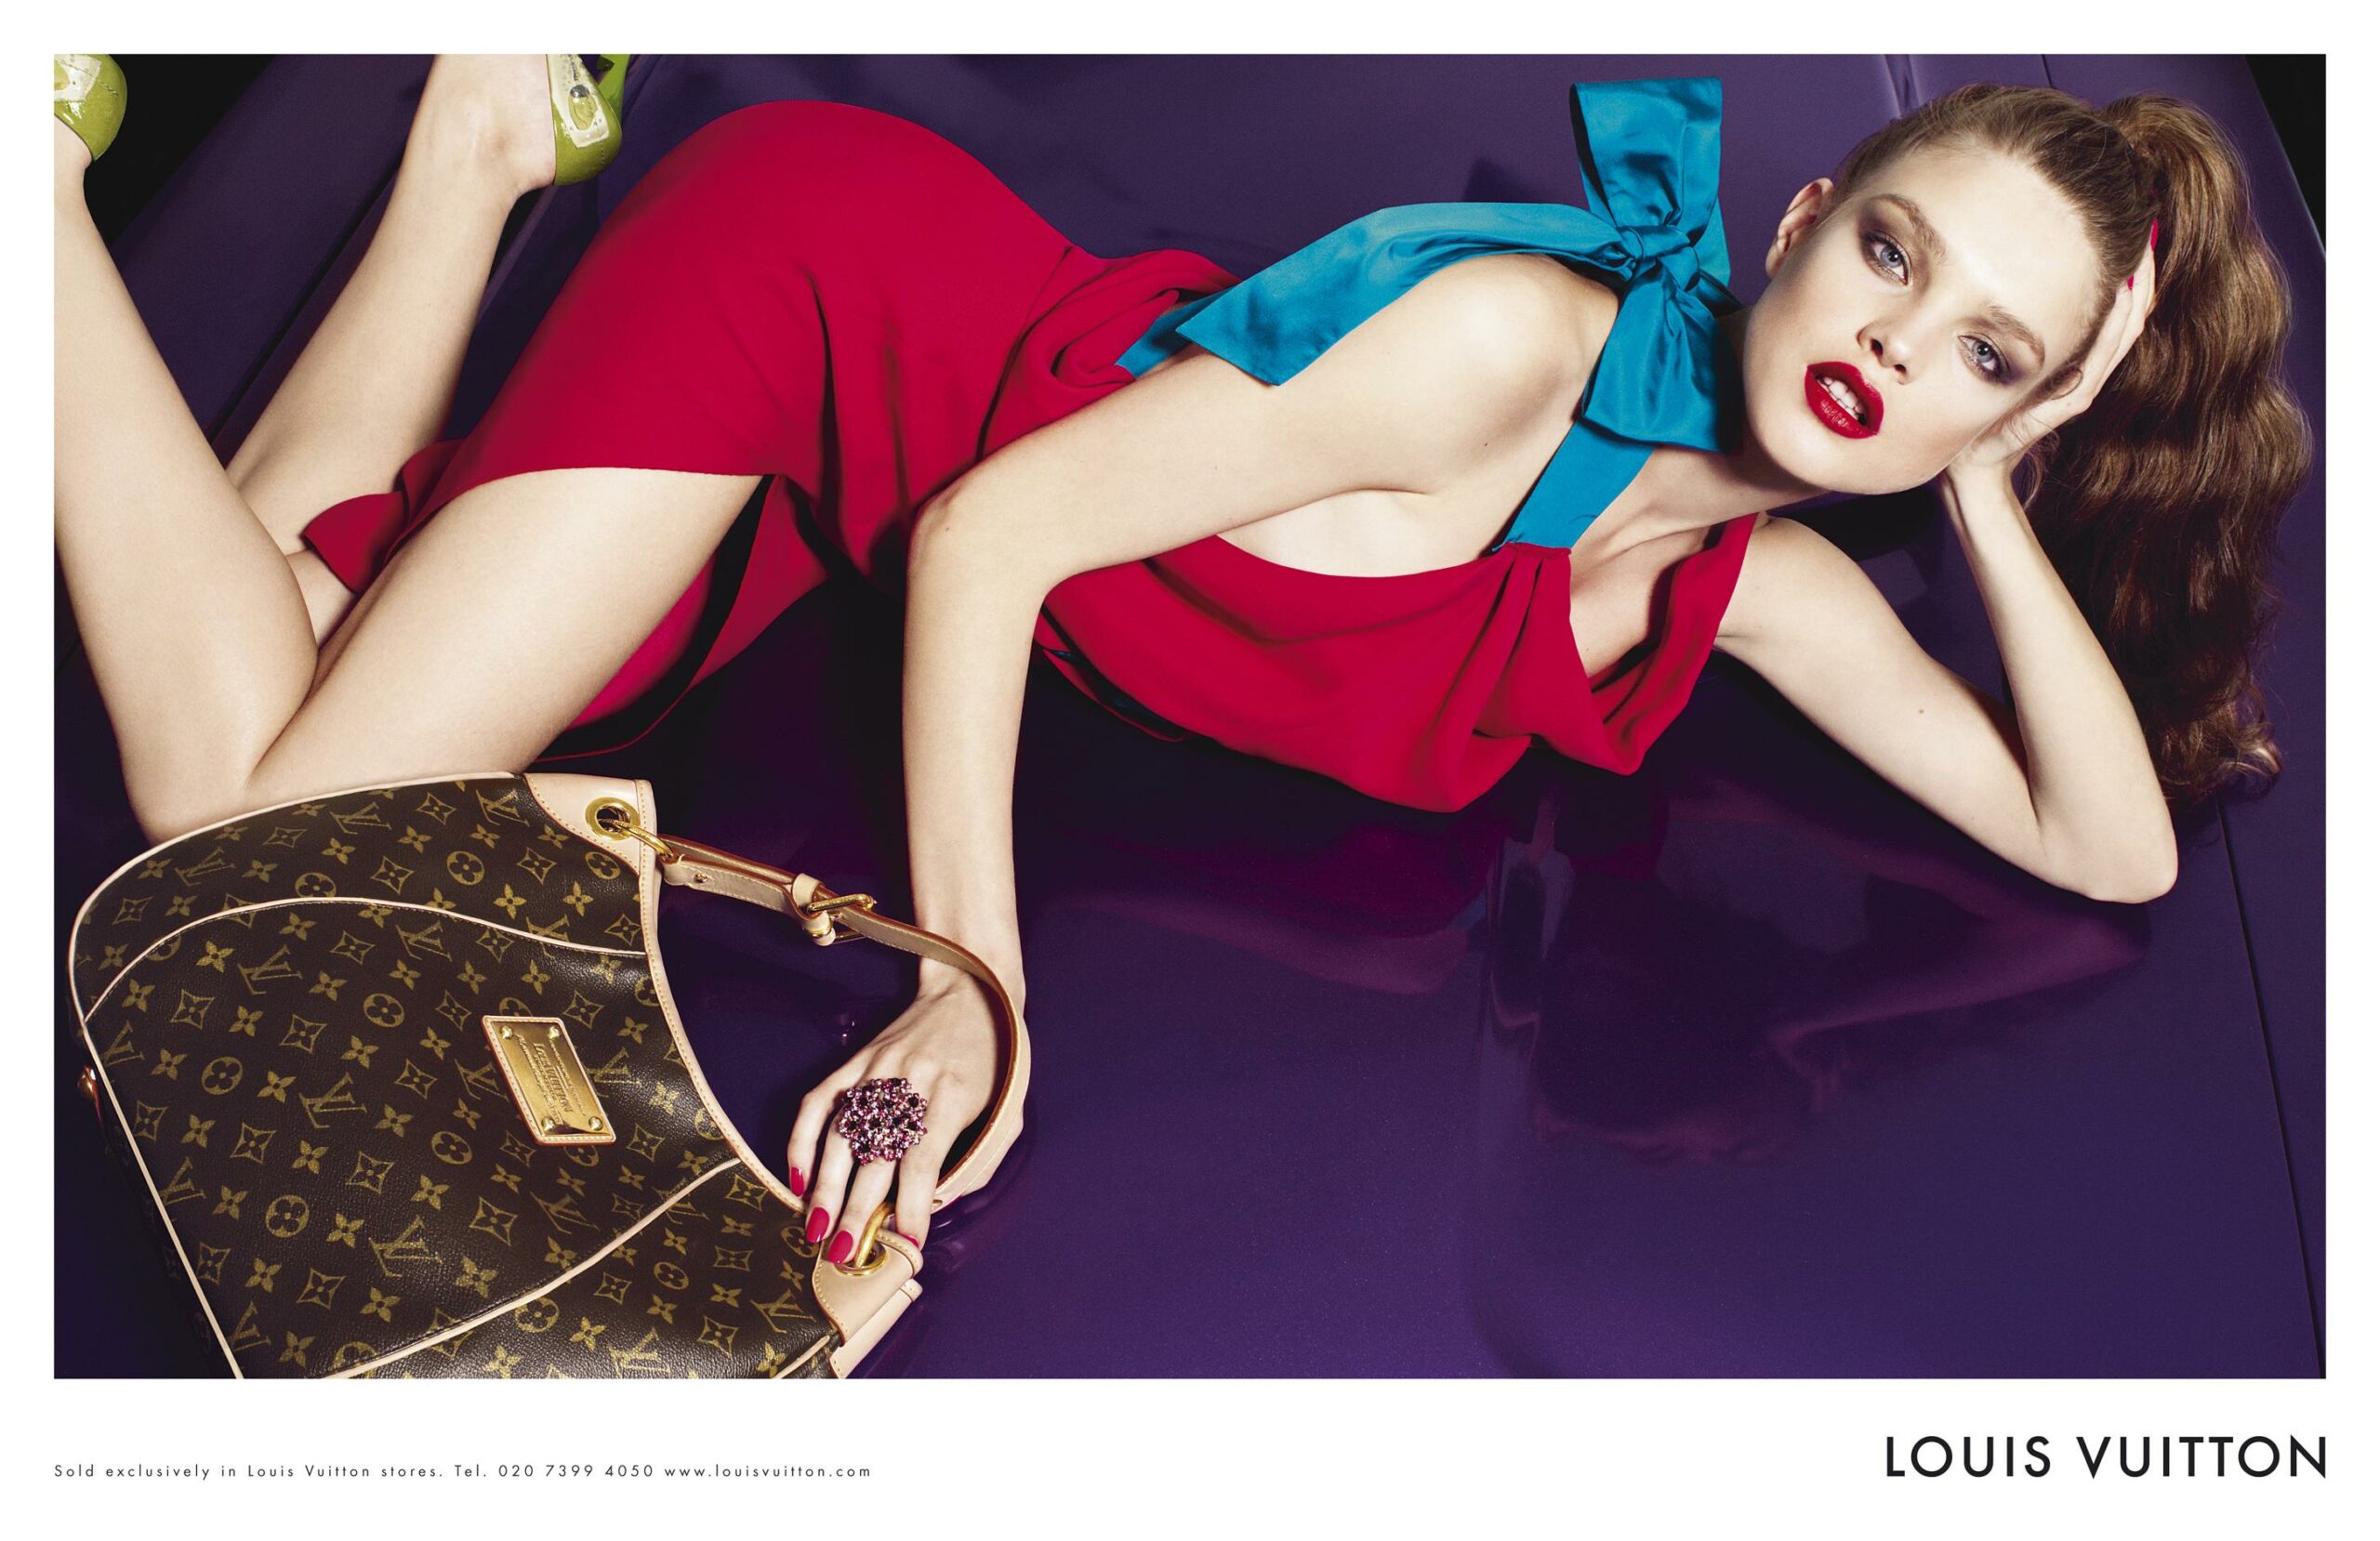 Who is the model for Louis Vuitton?